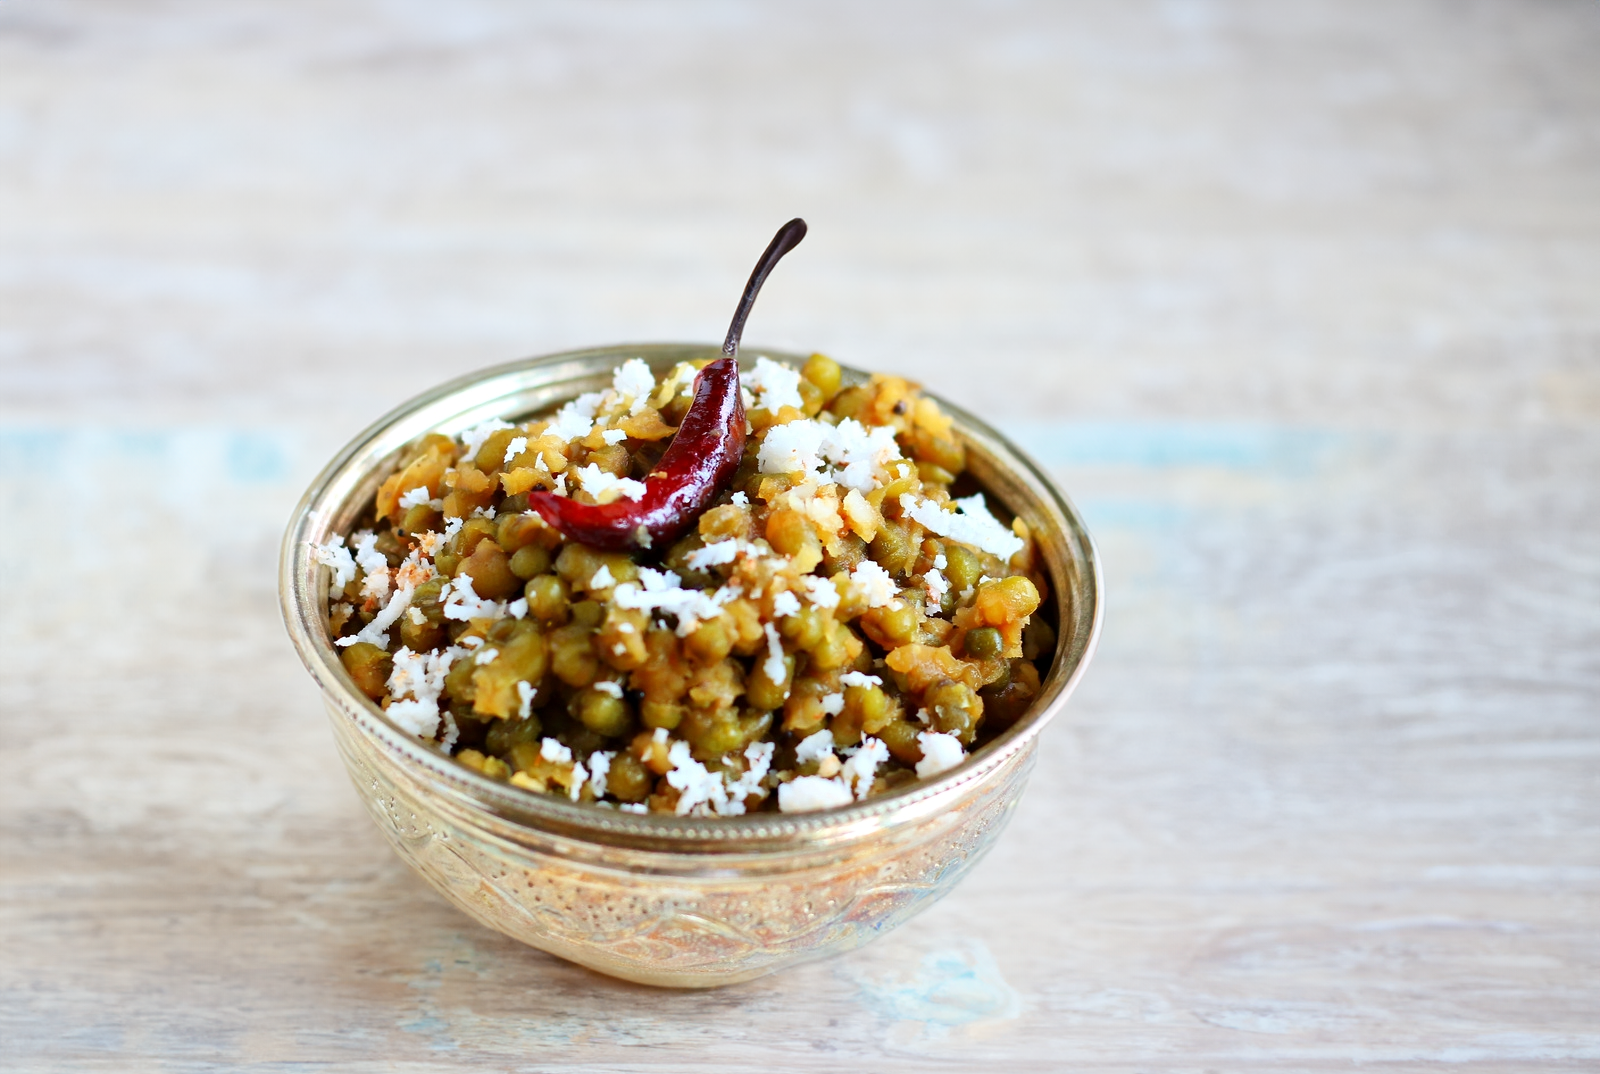 A sweet sundal recipe made from whole green gram dal